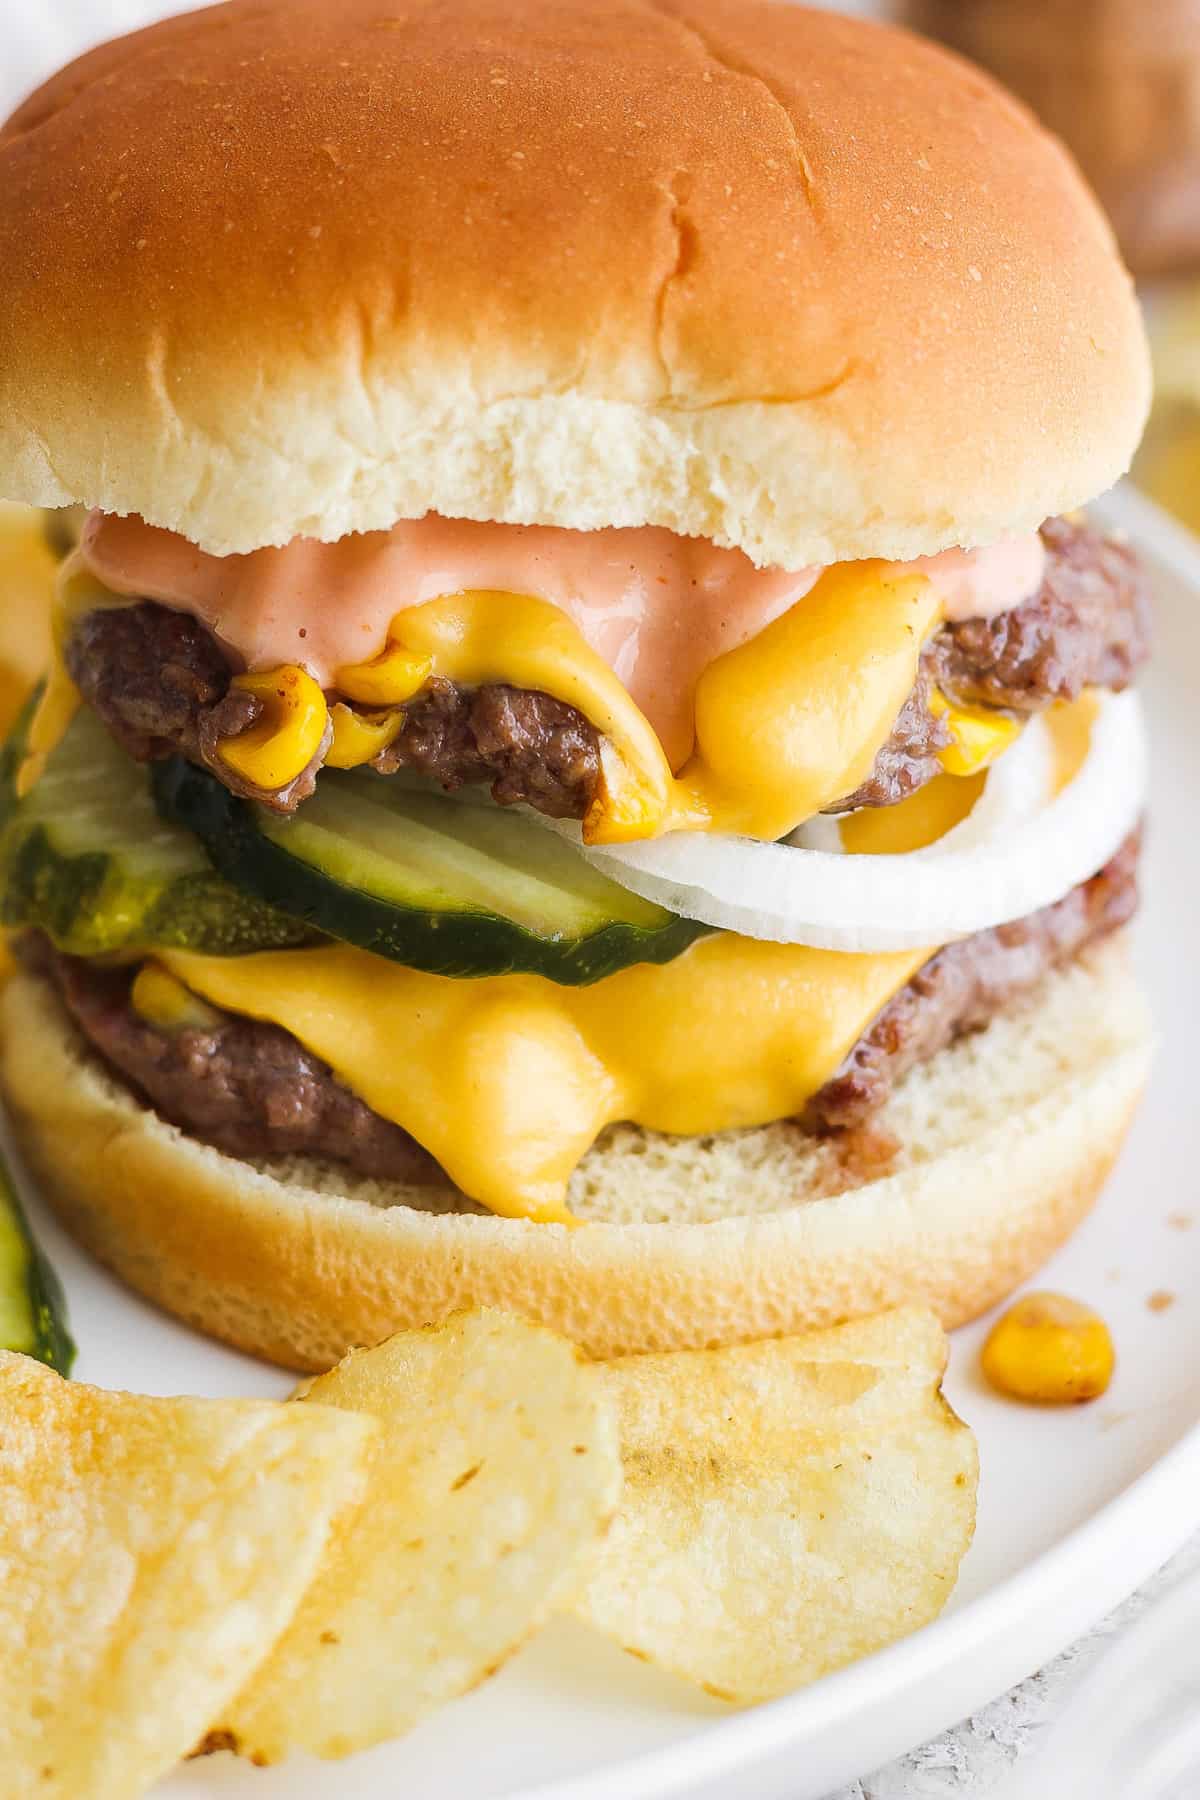 Cheeseburger with lettuce, pickles, and sauce served with potato chips.